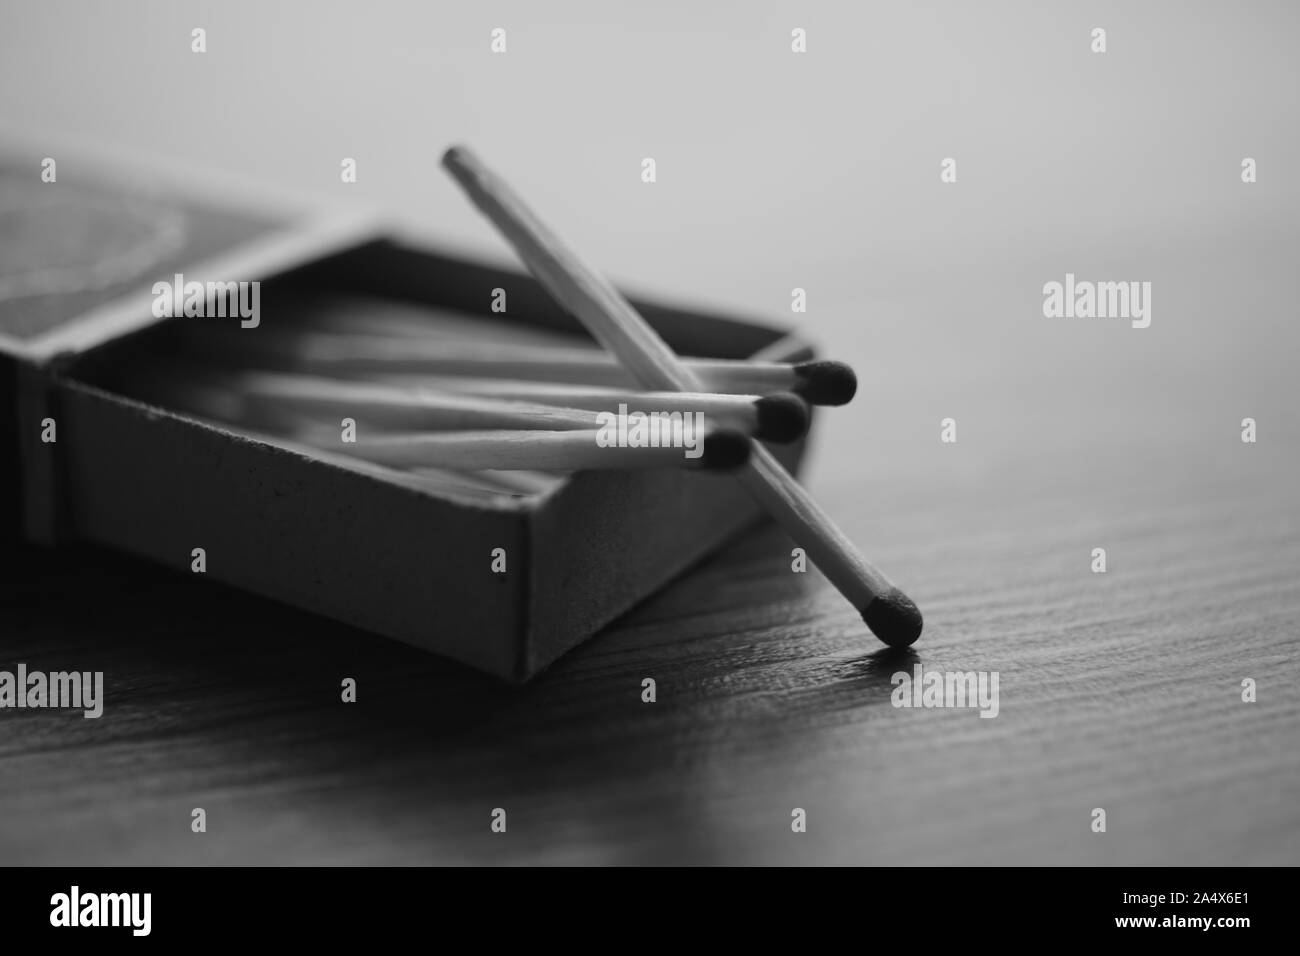 Open cardboard box with matches on the wooden table, copy space. BW photo. Stock Photo